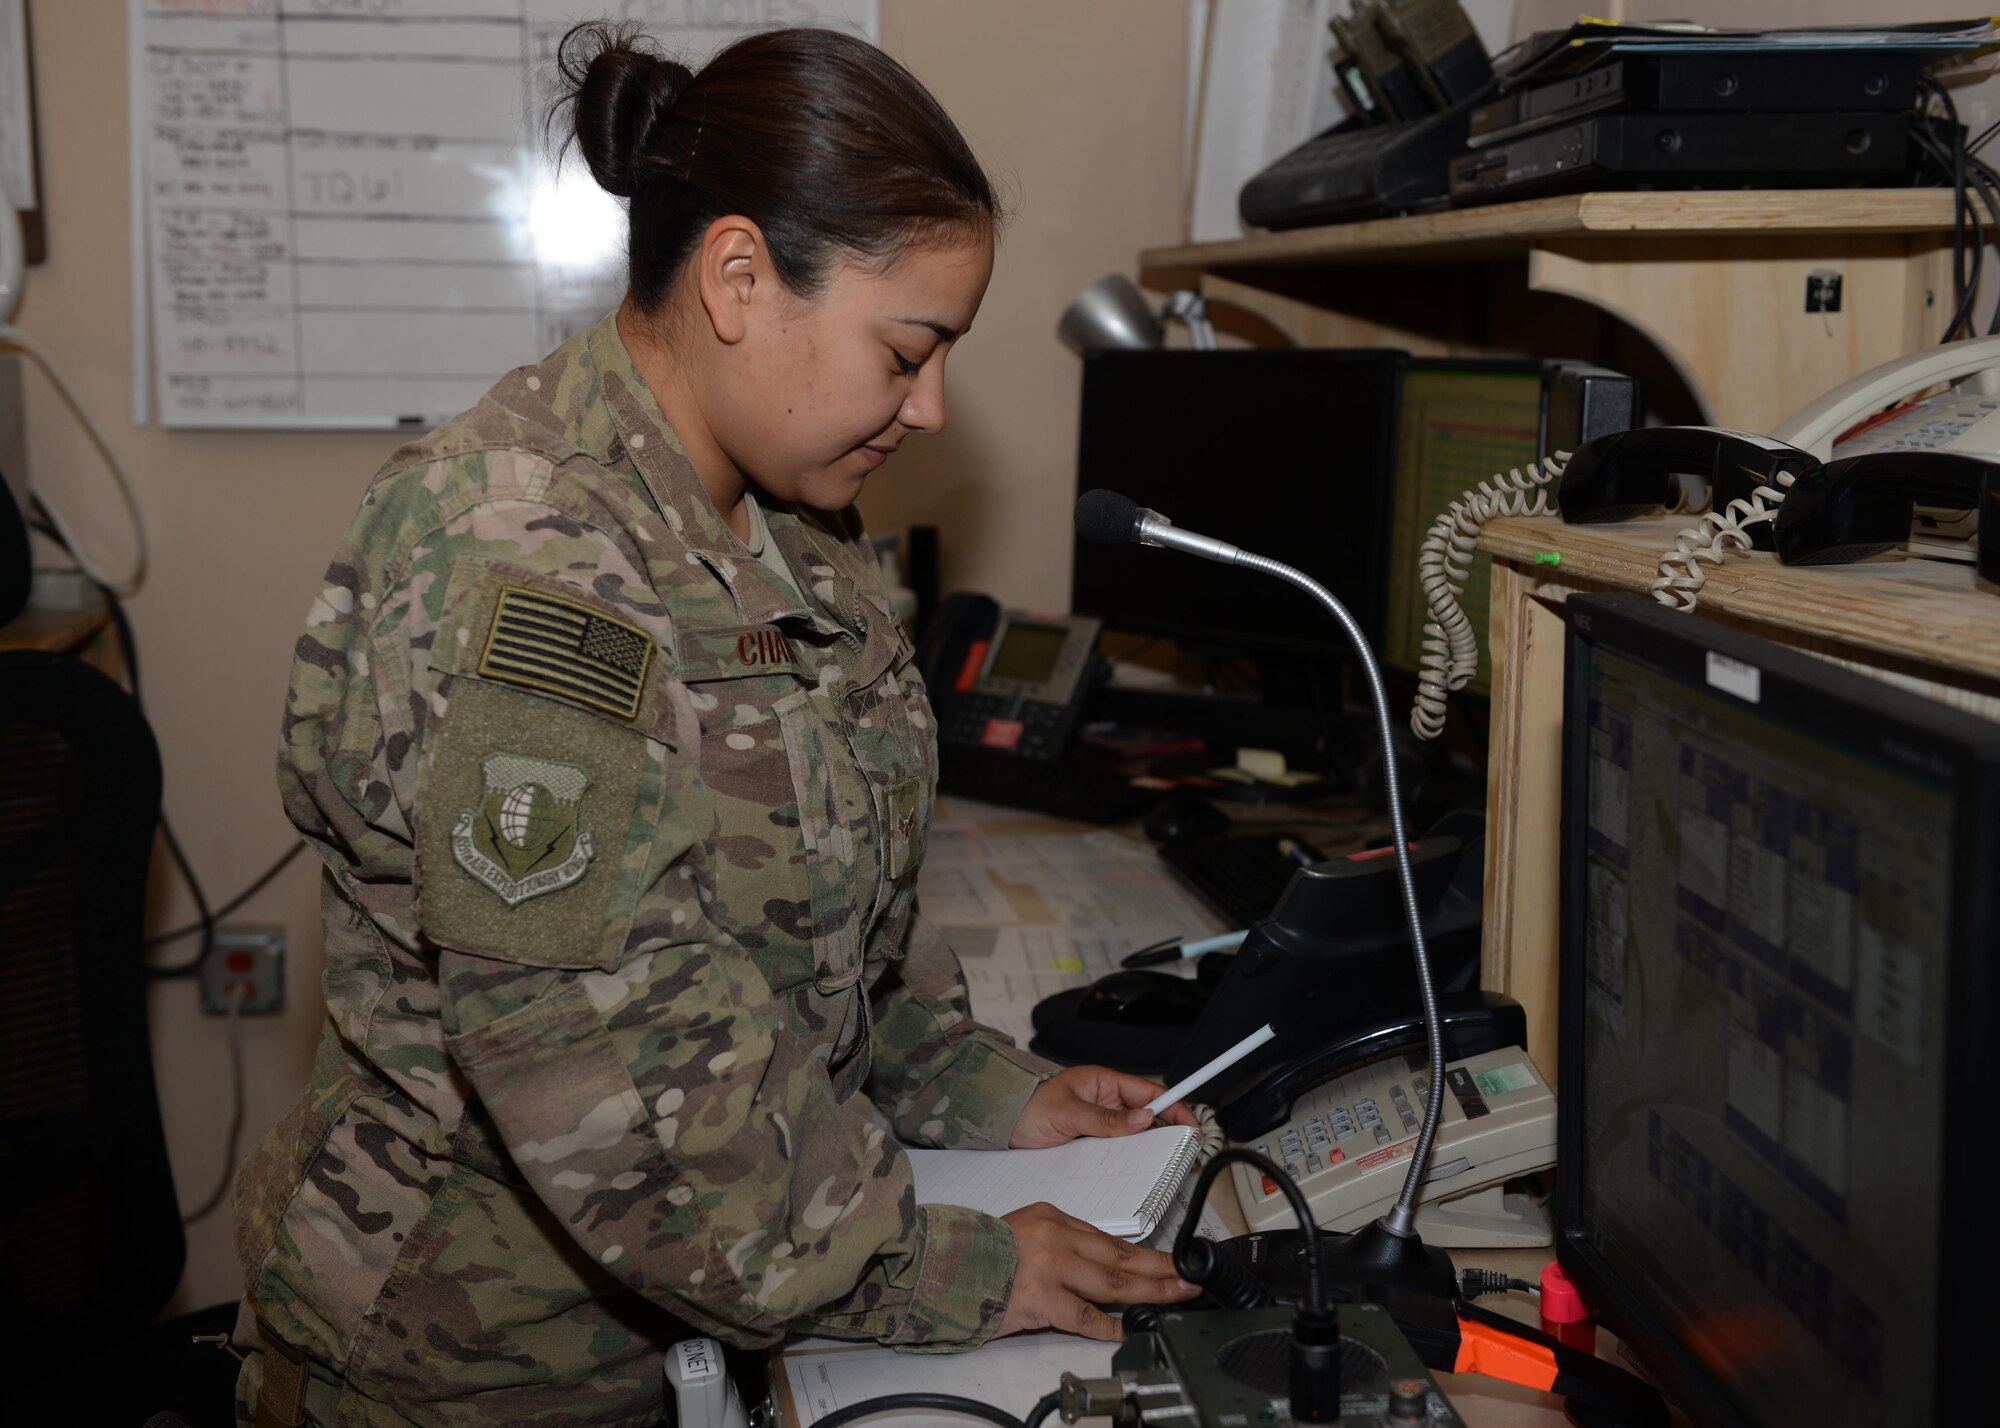 U.S. Air Force Airman 1st Class Judy Chavez-Colorado, 455th Air Expeditionary Wing Command Post emergency actions controller, collects information July 6, 2015, at Bagram Airfield, Afghanistan. Chavez-Colorado and her team are responsible for initiating wing recalls, relaying weather and inbound attack notifications to the base as well as work with aircrews and other various agencies in keeping the base abreast on important information. (U.S. Air Force photo by Senior Airman Cierra Presentado/Released)